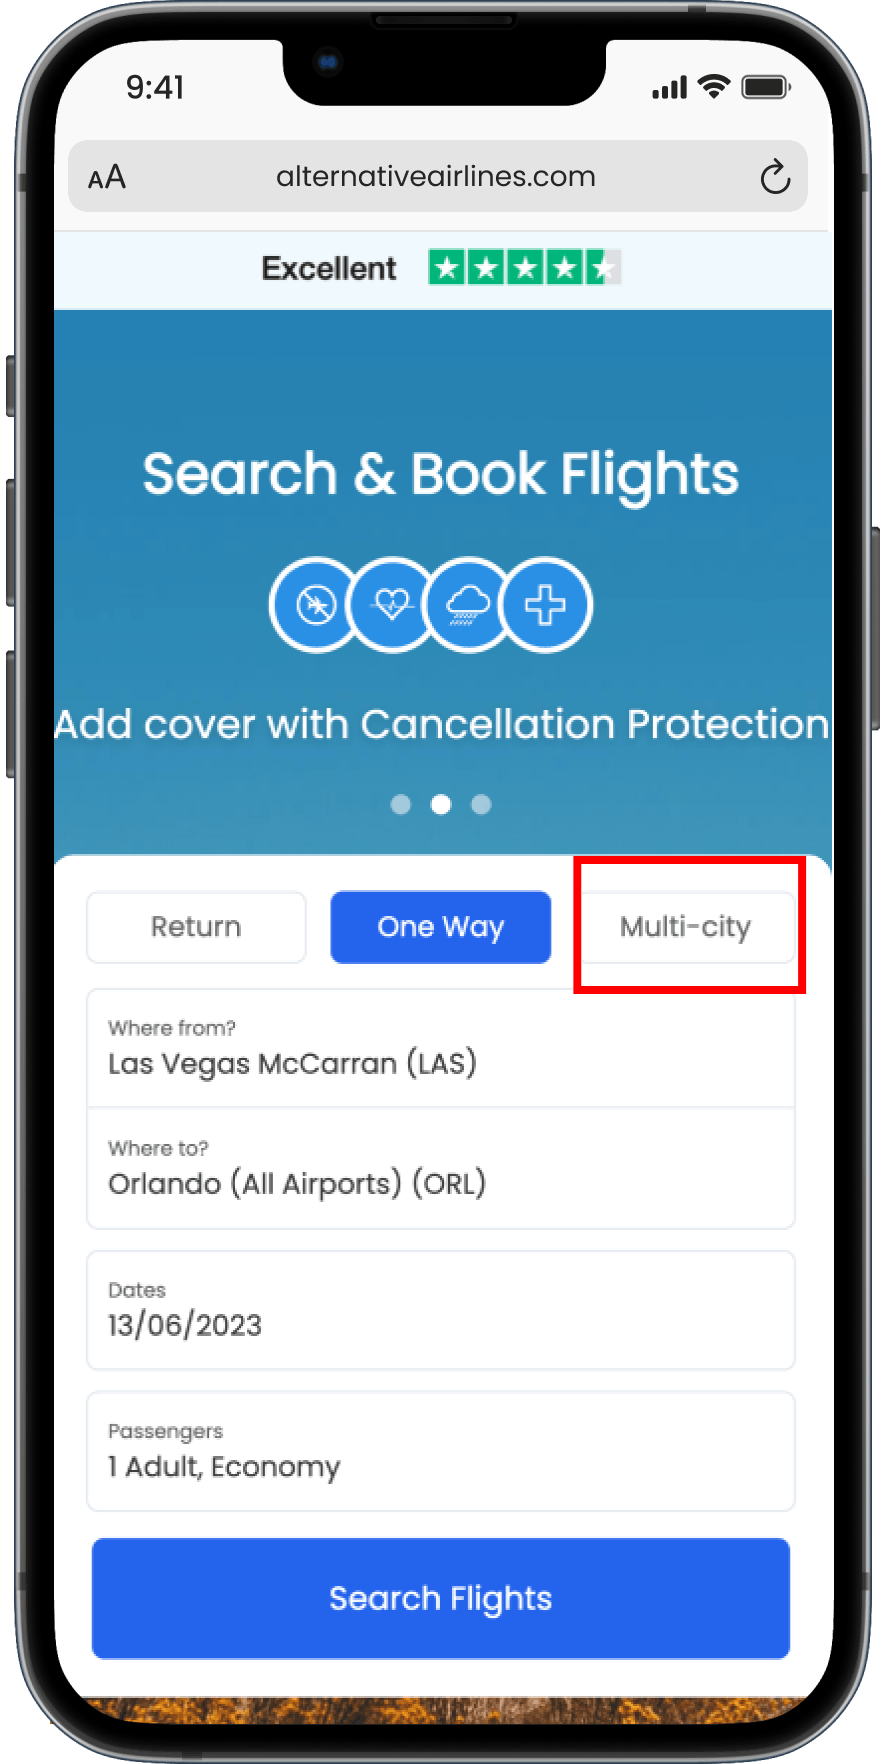 Step 1 - Select multi-city option on the search form